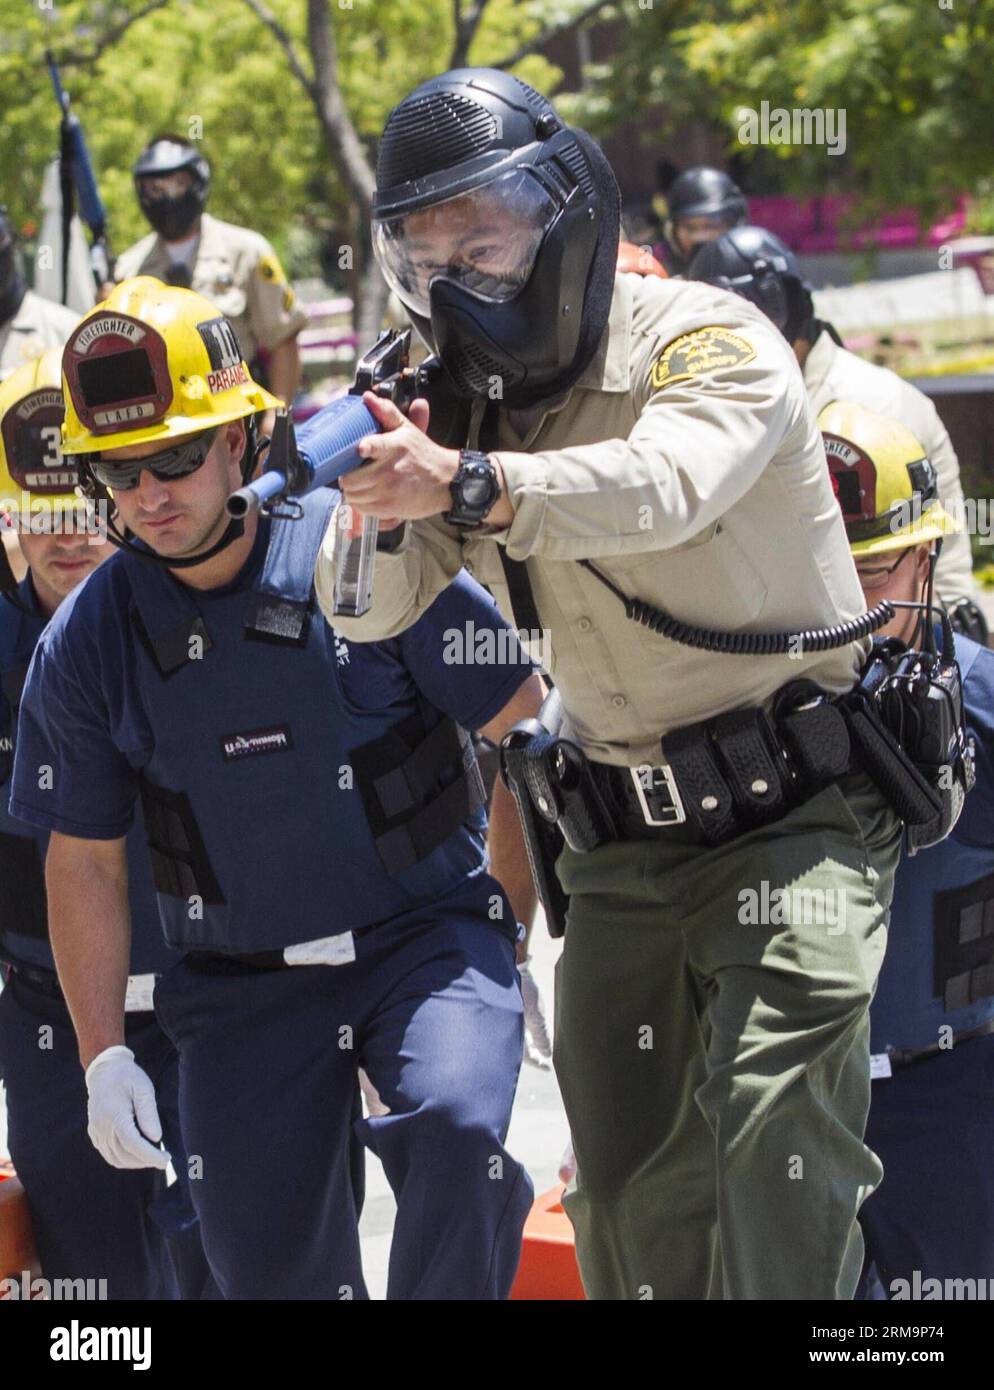 (140529) -- LOS ANGELES, May 29, 2014 (Xinhua) -- Members of Special Enforcement Bureau cover the rescue team entering Los Angeles County Hall of Administration during a training exercise involving a simulated shooting in downtown Los Angeles, the United States, on May 28, 2014. The Los Angeles County Sheriff s Department held a large-scale training exercise involving a simulated shooting taking place at a Board of Supervisors meeting here Wednesday. (Xinhua/Zhao Hanrong) (zjl) U.S.-LOS ANGELES-SHOT-TRAINING EXERCISE PUBLICATIONxNOTxINxCHN   Los Angeles May 29 2014 XINHUA Members of Special En Stock Photo